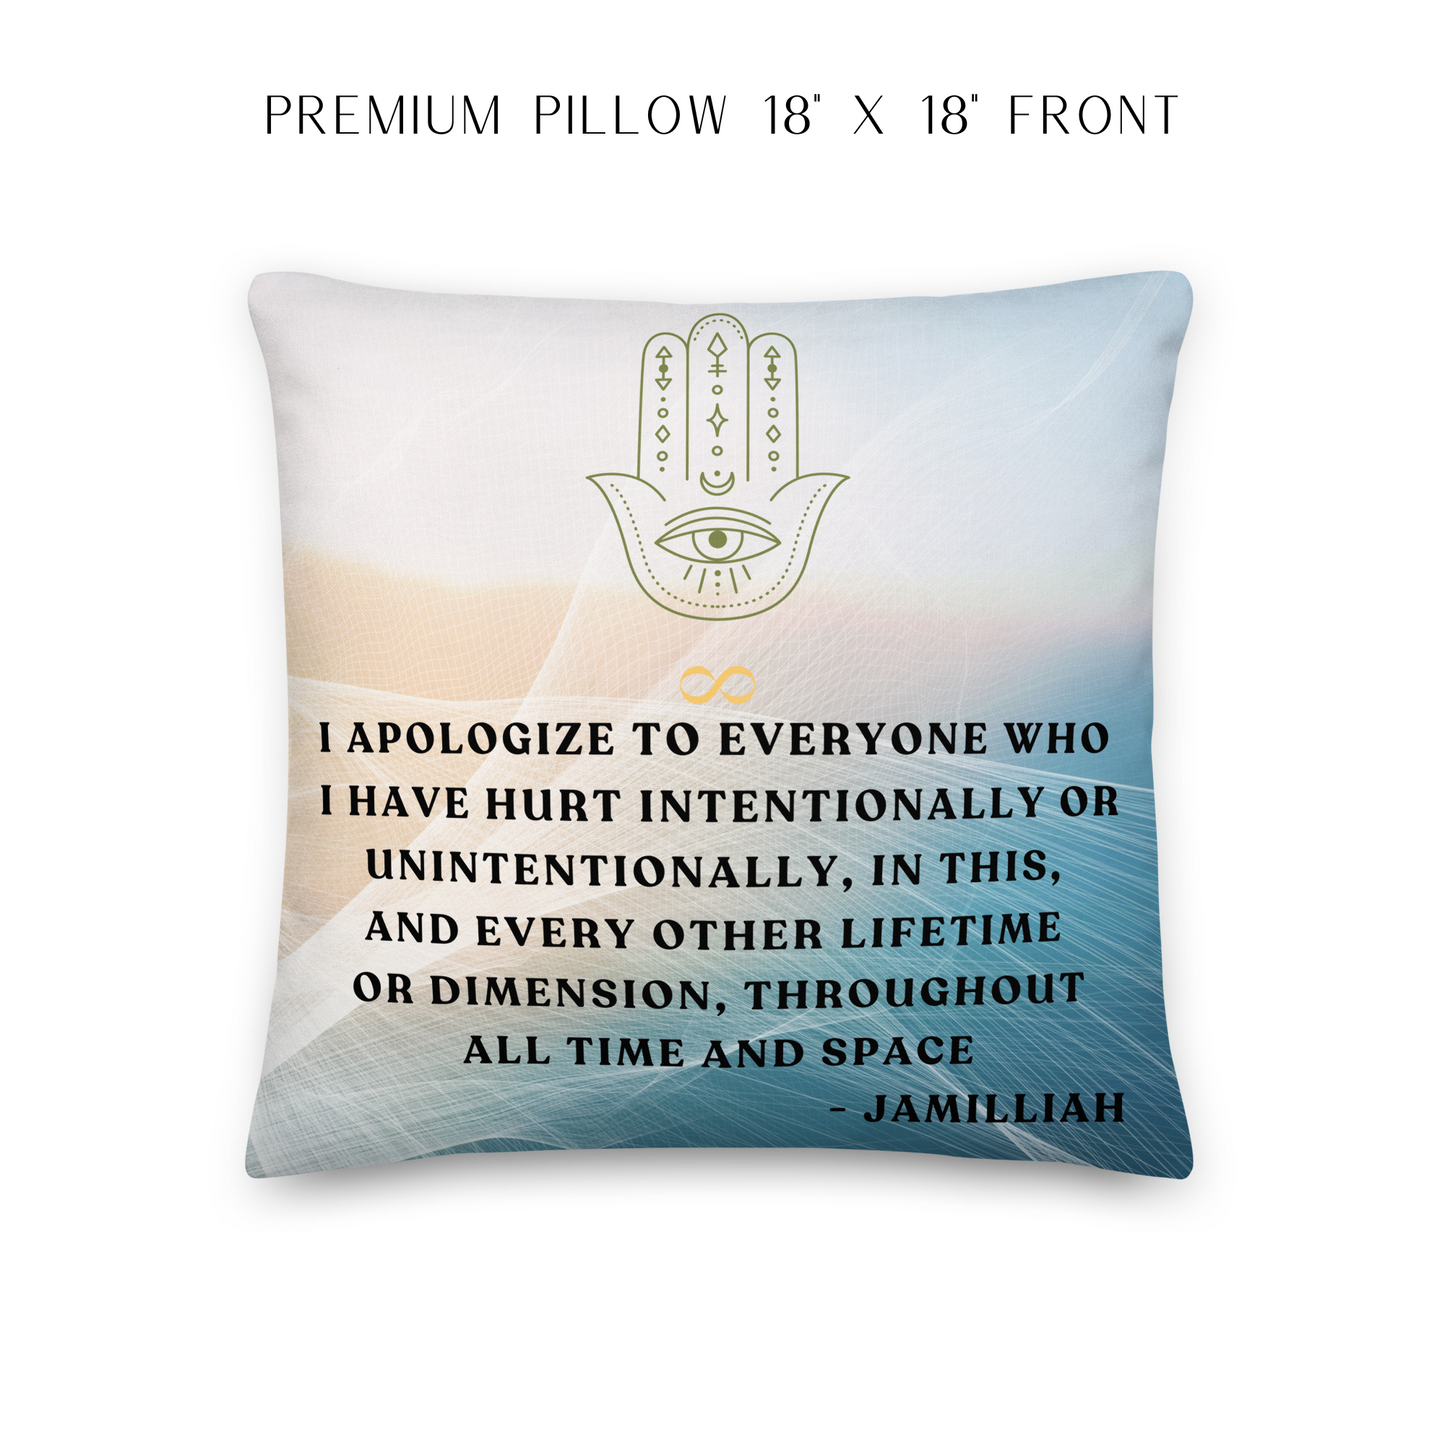 18x18 inch, white, peach, bluish-green gradient colors on premium pillow, front. Mystical hamsa hand/infinity symbol brand logo. Original wise quote mantra/saying/tagline/motto/slogan. "I Apologize To Everyone Who I Have Hurt Intentionally Or Unintentionally, In This, And Every Other Lifetime Or Dimension, Throughout All Time And Space." - Jamilliah JAMILLIAH'S WISDOM IS TIMELESS SHOP - wisdomistimeless.com.